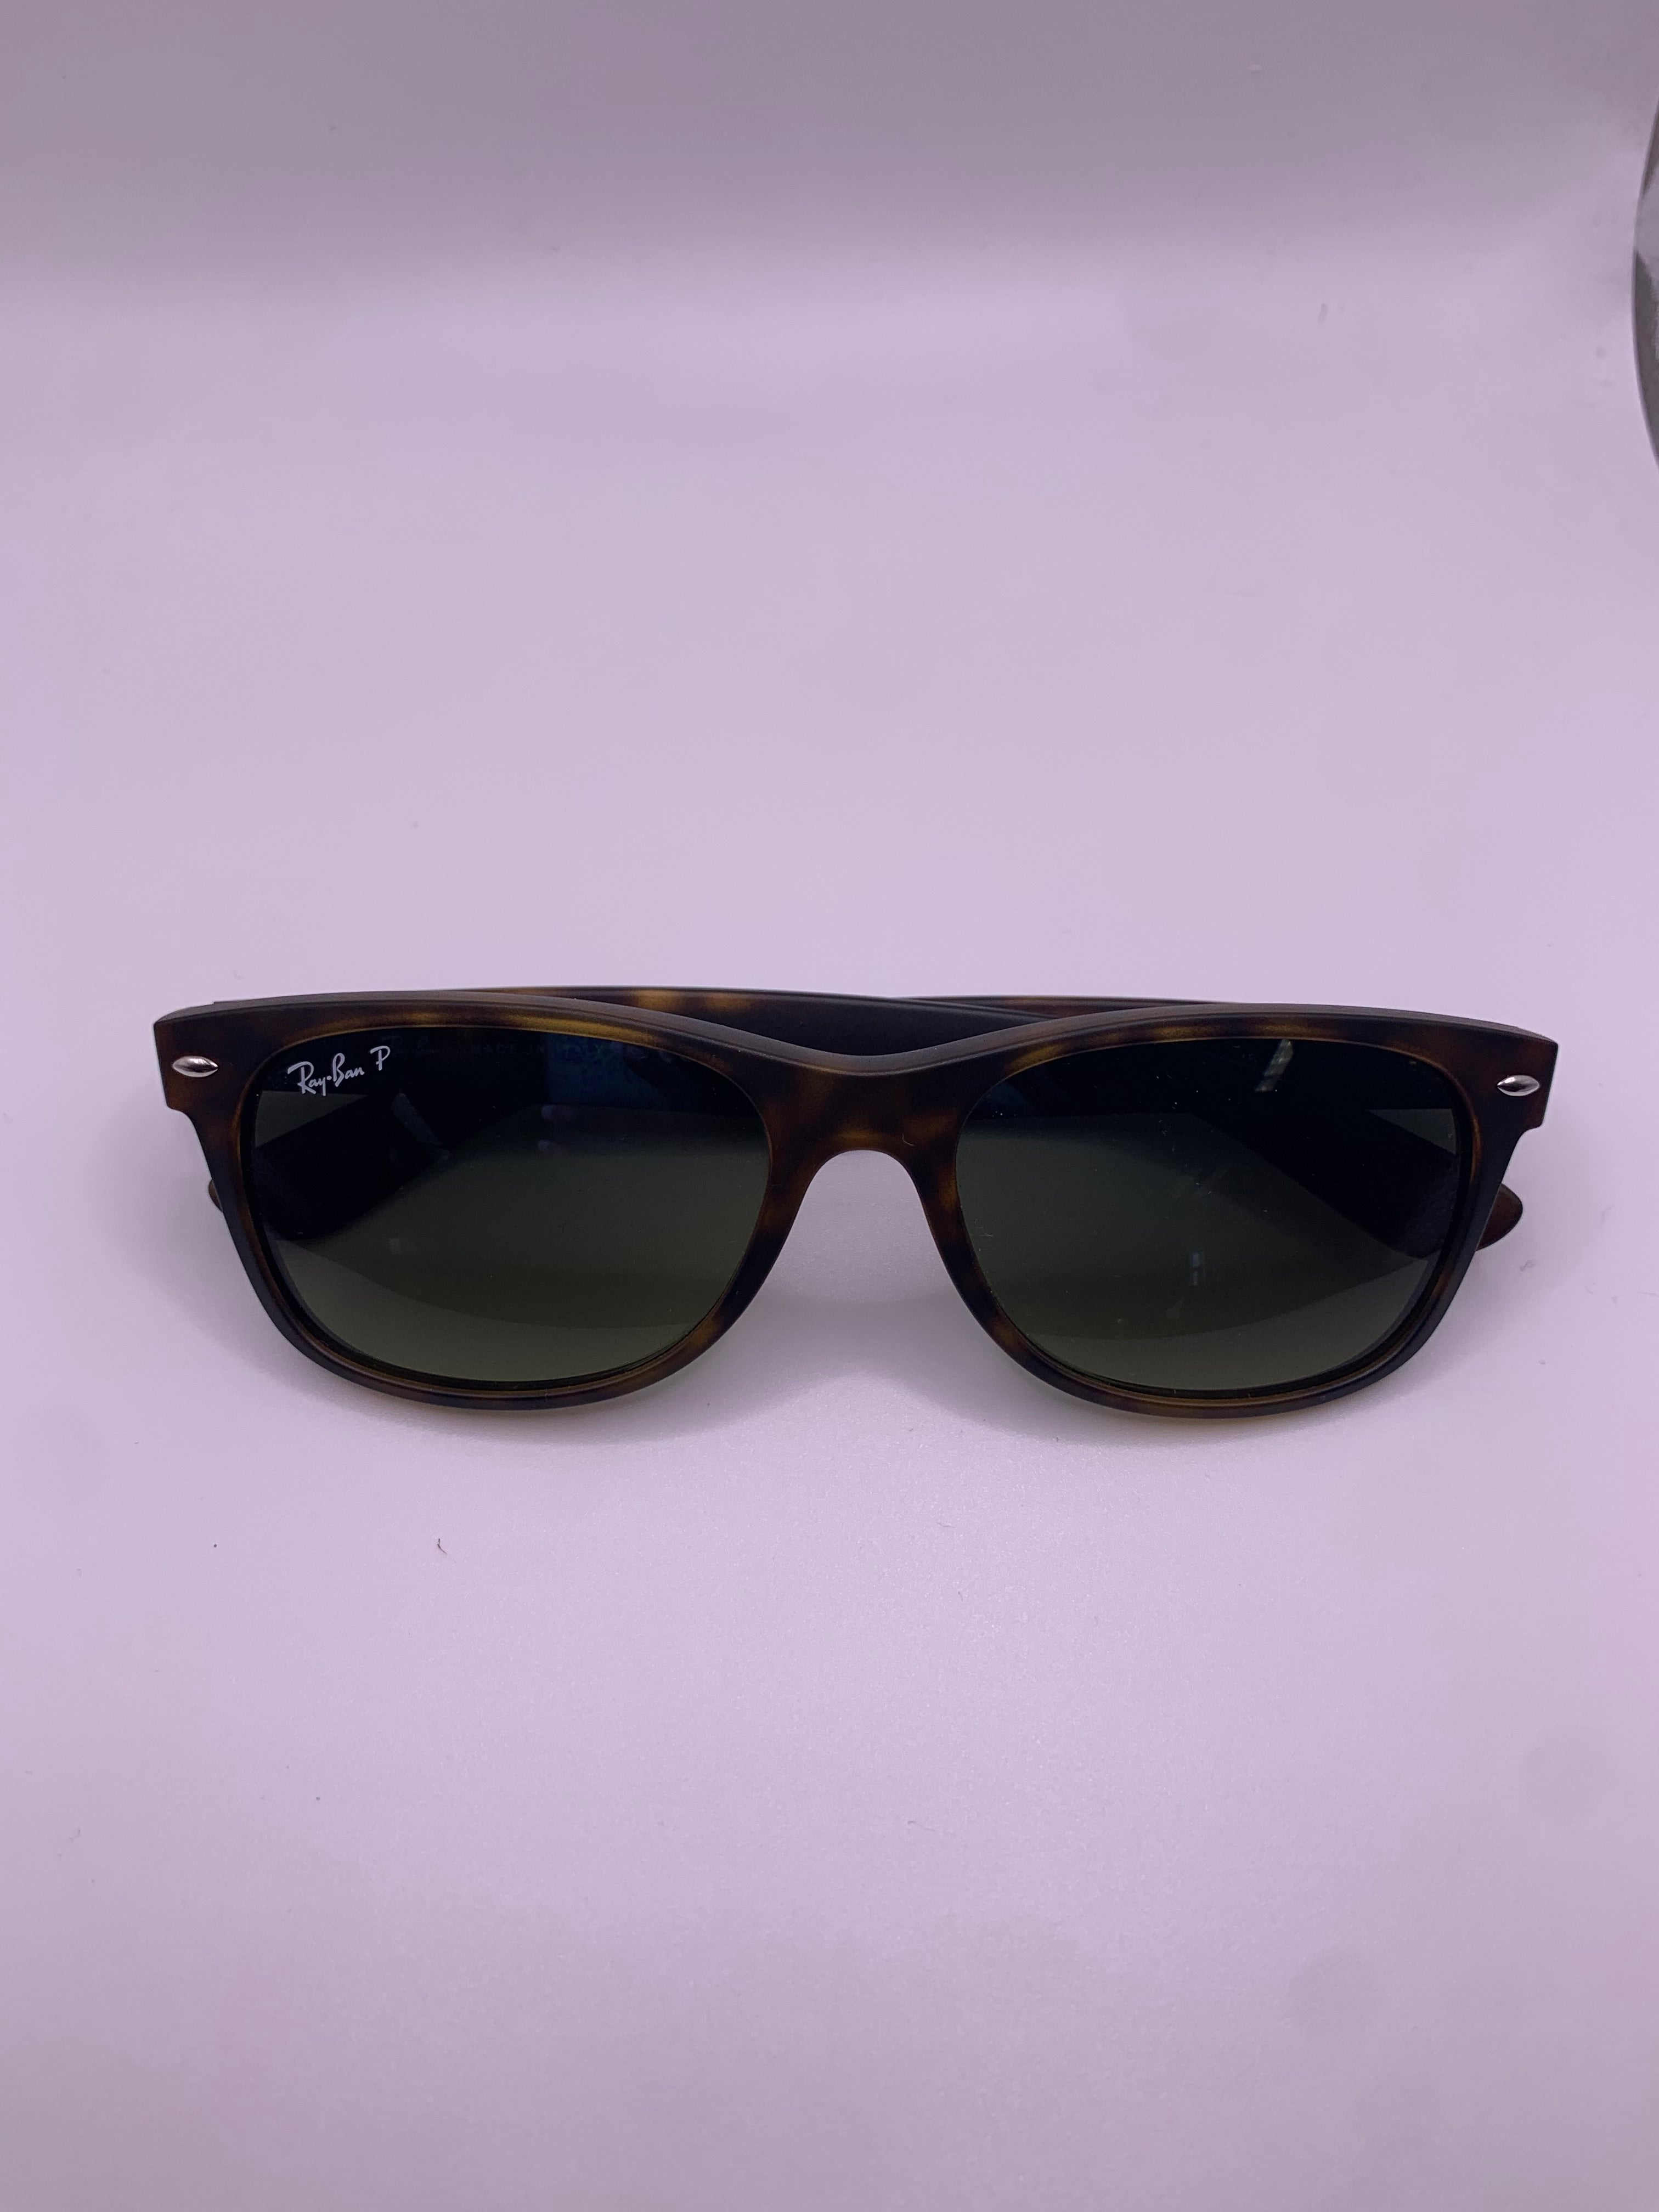 Ray-Ban Original Wayfarer Classic Men Sunglass Tortoise [RB2140 902/51] in  Bangalore at best price by August Purple Services Pvt Ltd - Justdial